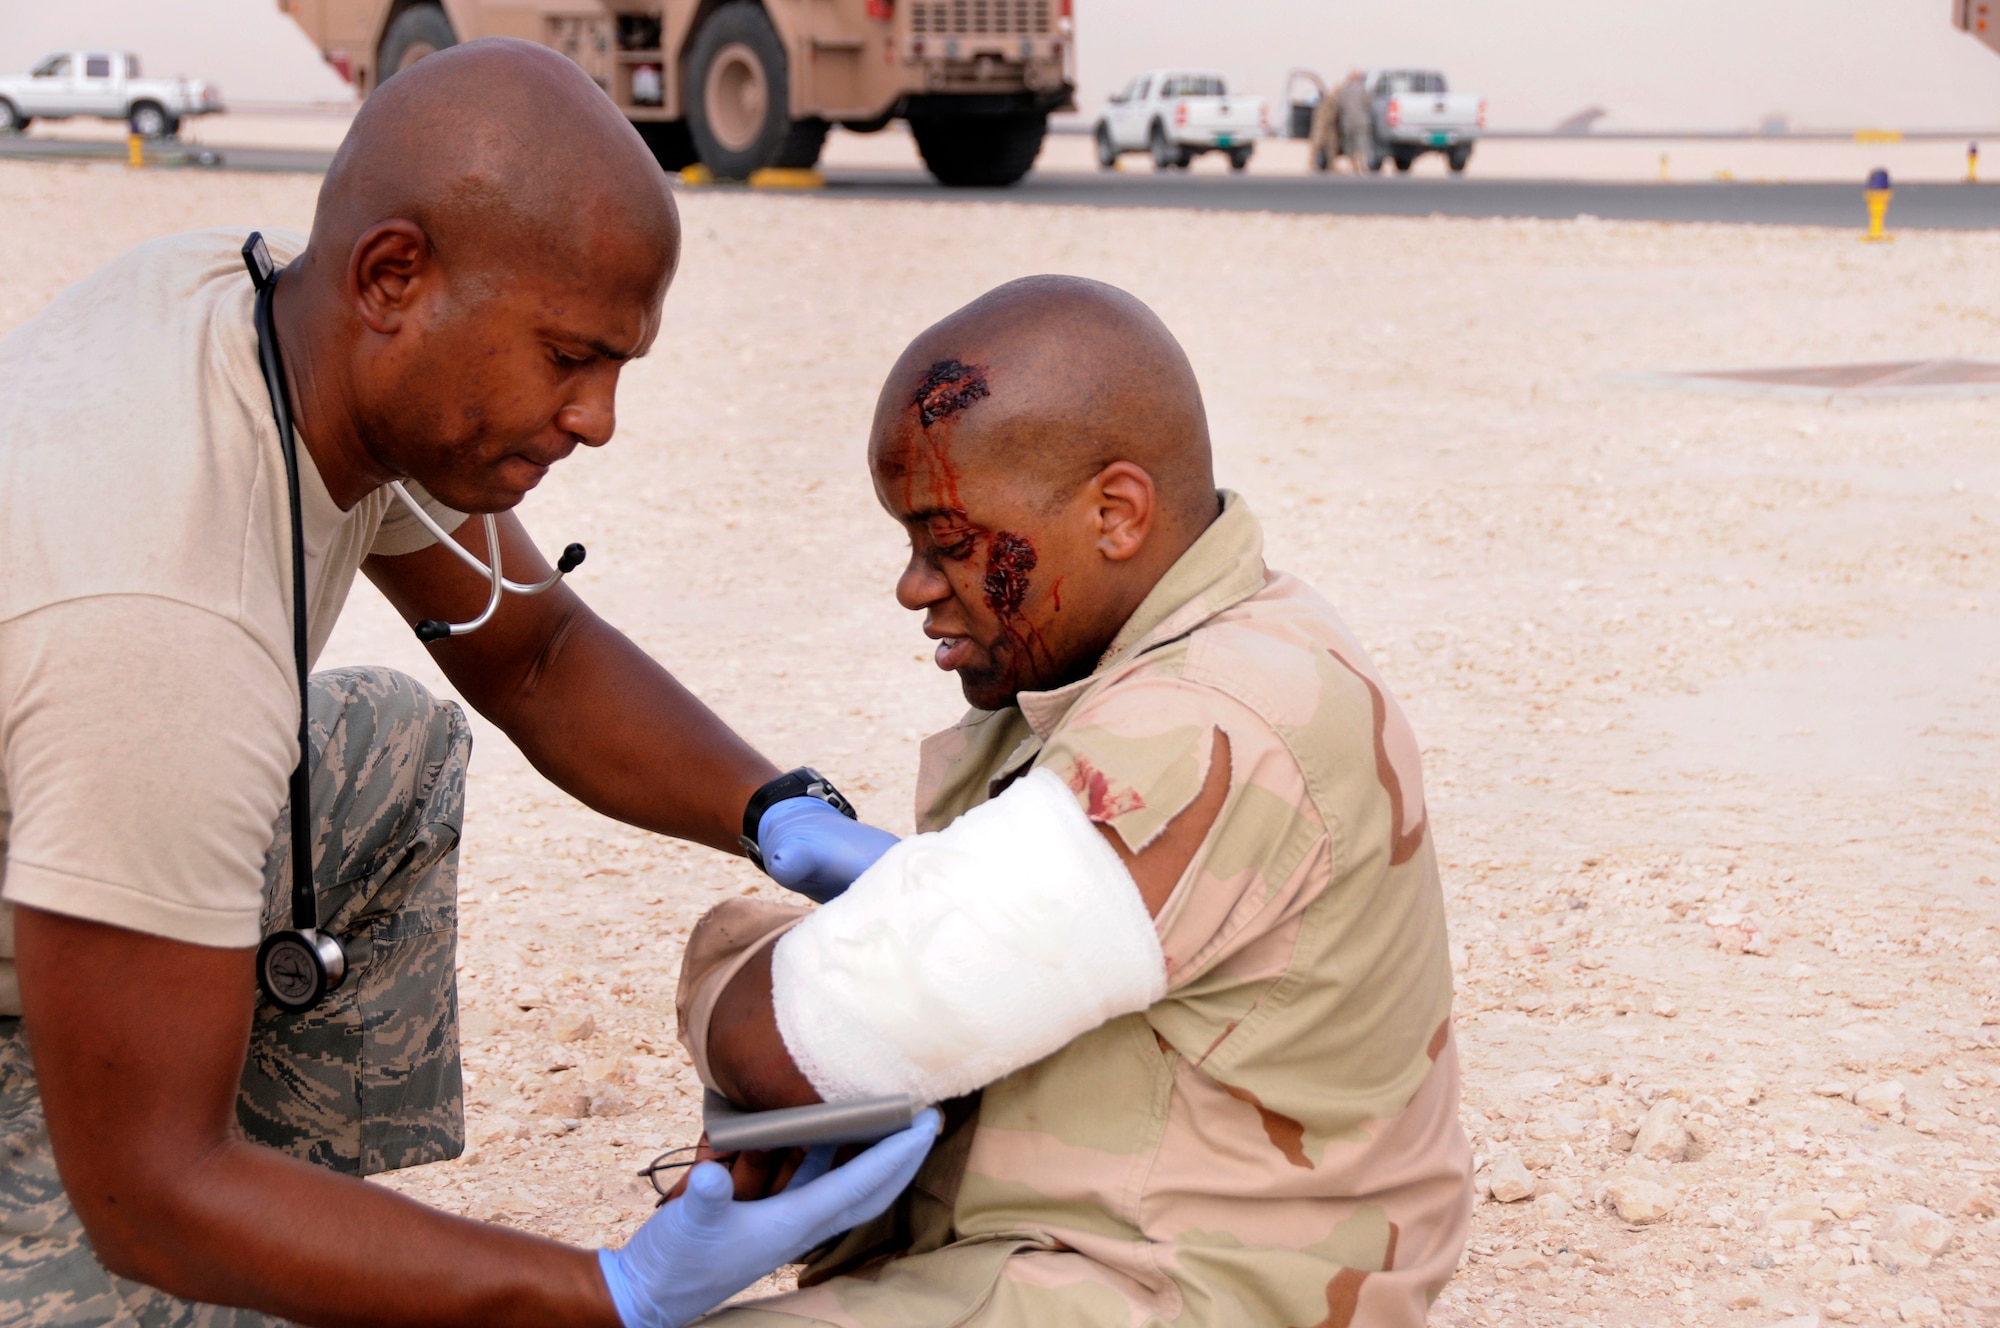 Tech. Sgt. Enoch Daniels, 340th Expeditionary Air Refueling Squadron independent medical duty technician, fits a splint onto the simulated injured arm of Senior Airman Jonathan Shiels during a Major Accident Response Exercise in Southwest Asia July 28. Airman Shiels, 379th Expeditionary Force Support Squadron, role plays an accident victim to help test emergency response operations, accountability of personnel, mortuary services, and higher headquarters reporting procedures.  Sergeant Daniels is deployed from MacDill Air Force Base, Fla., and Airman Shiels is deployed from Davis-Monthan Air Force Base, Ariz. (U.S. Air Force photo by Tech. Sgt. Michael Boquette)